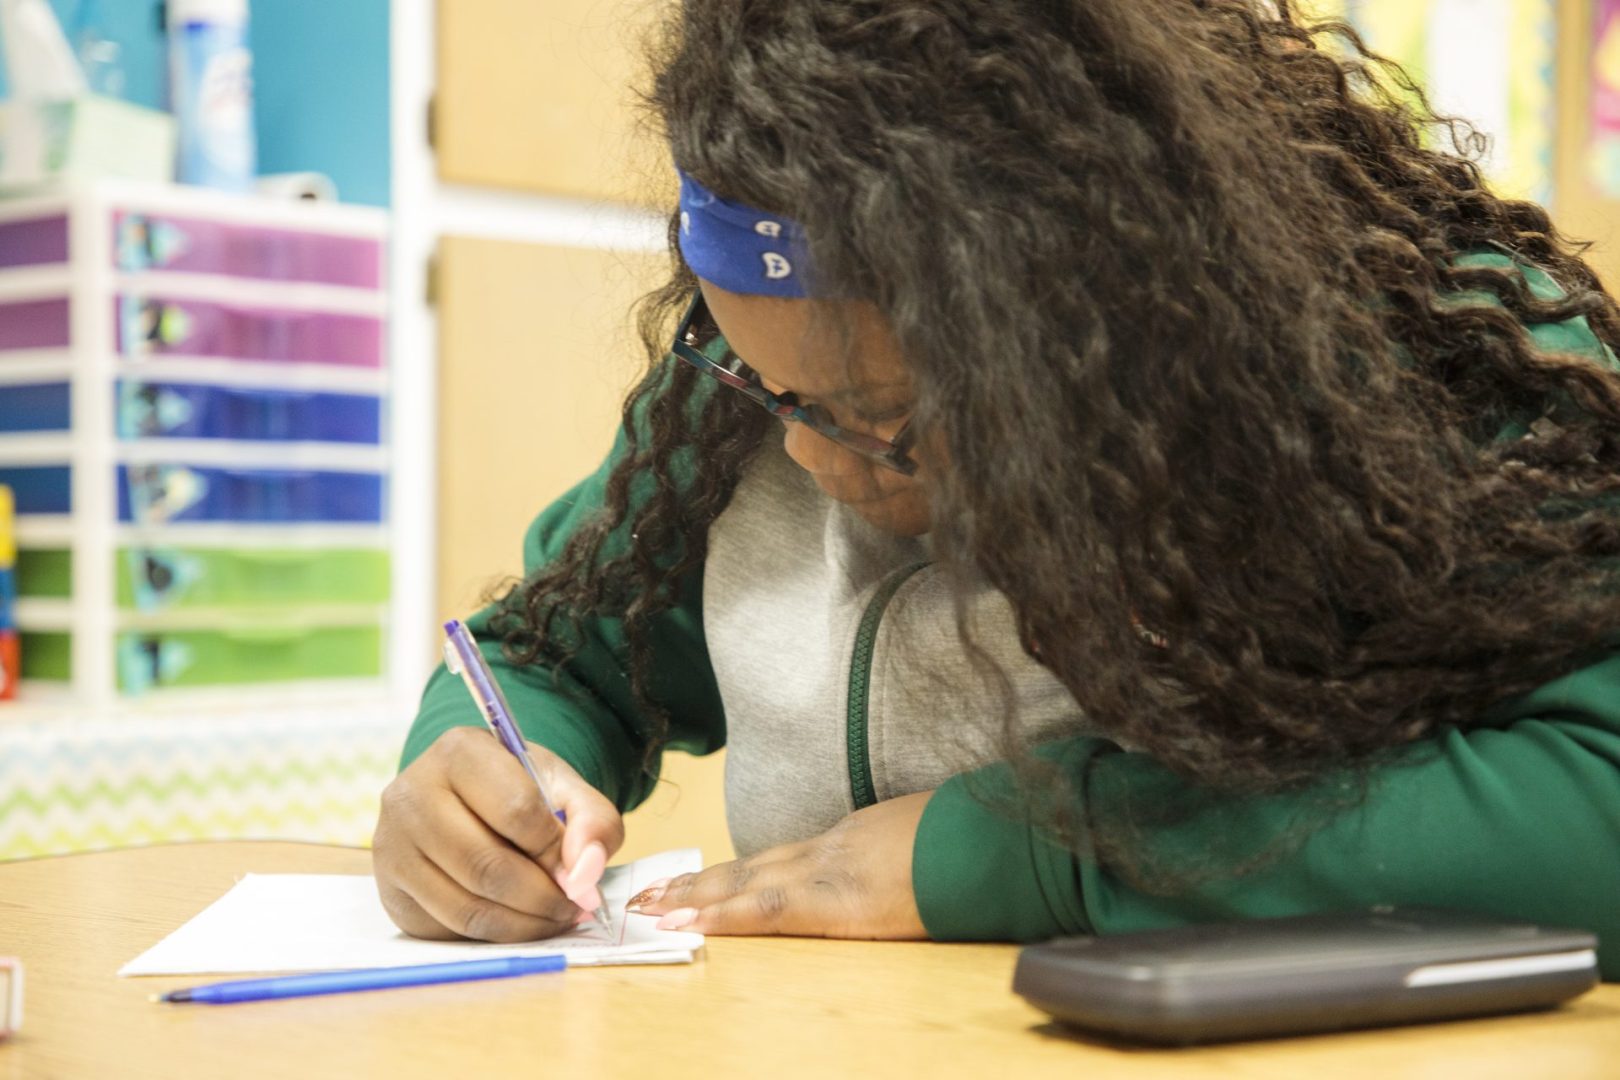 A teenage girl writing on a notebook in a classroom.